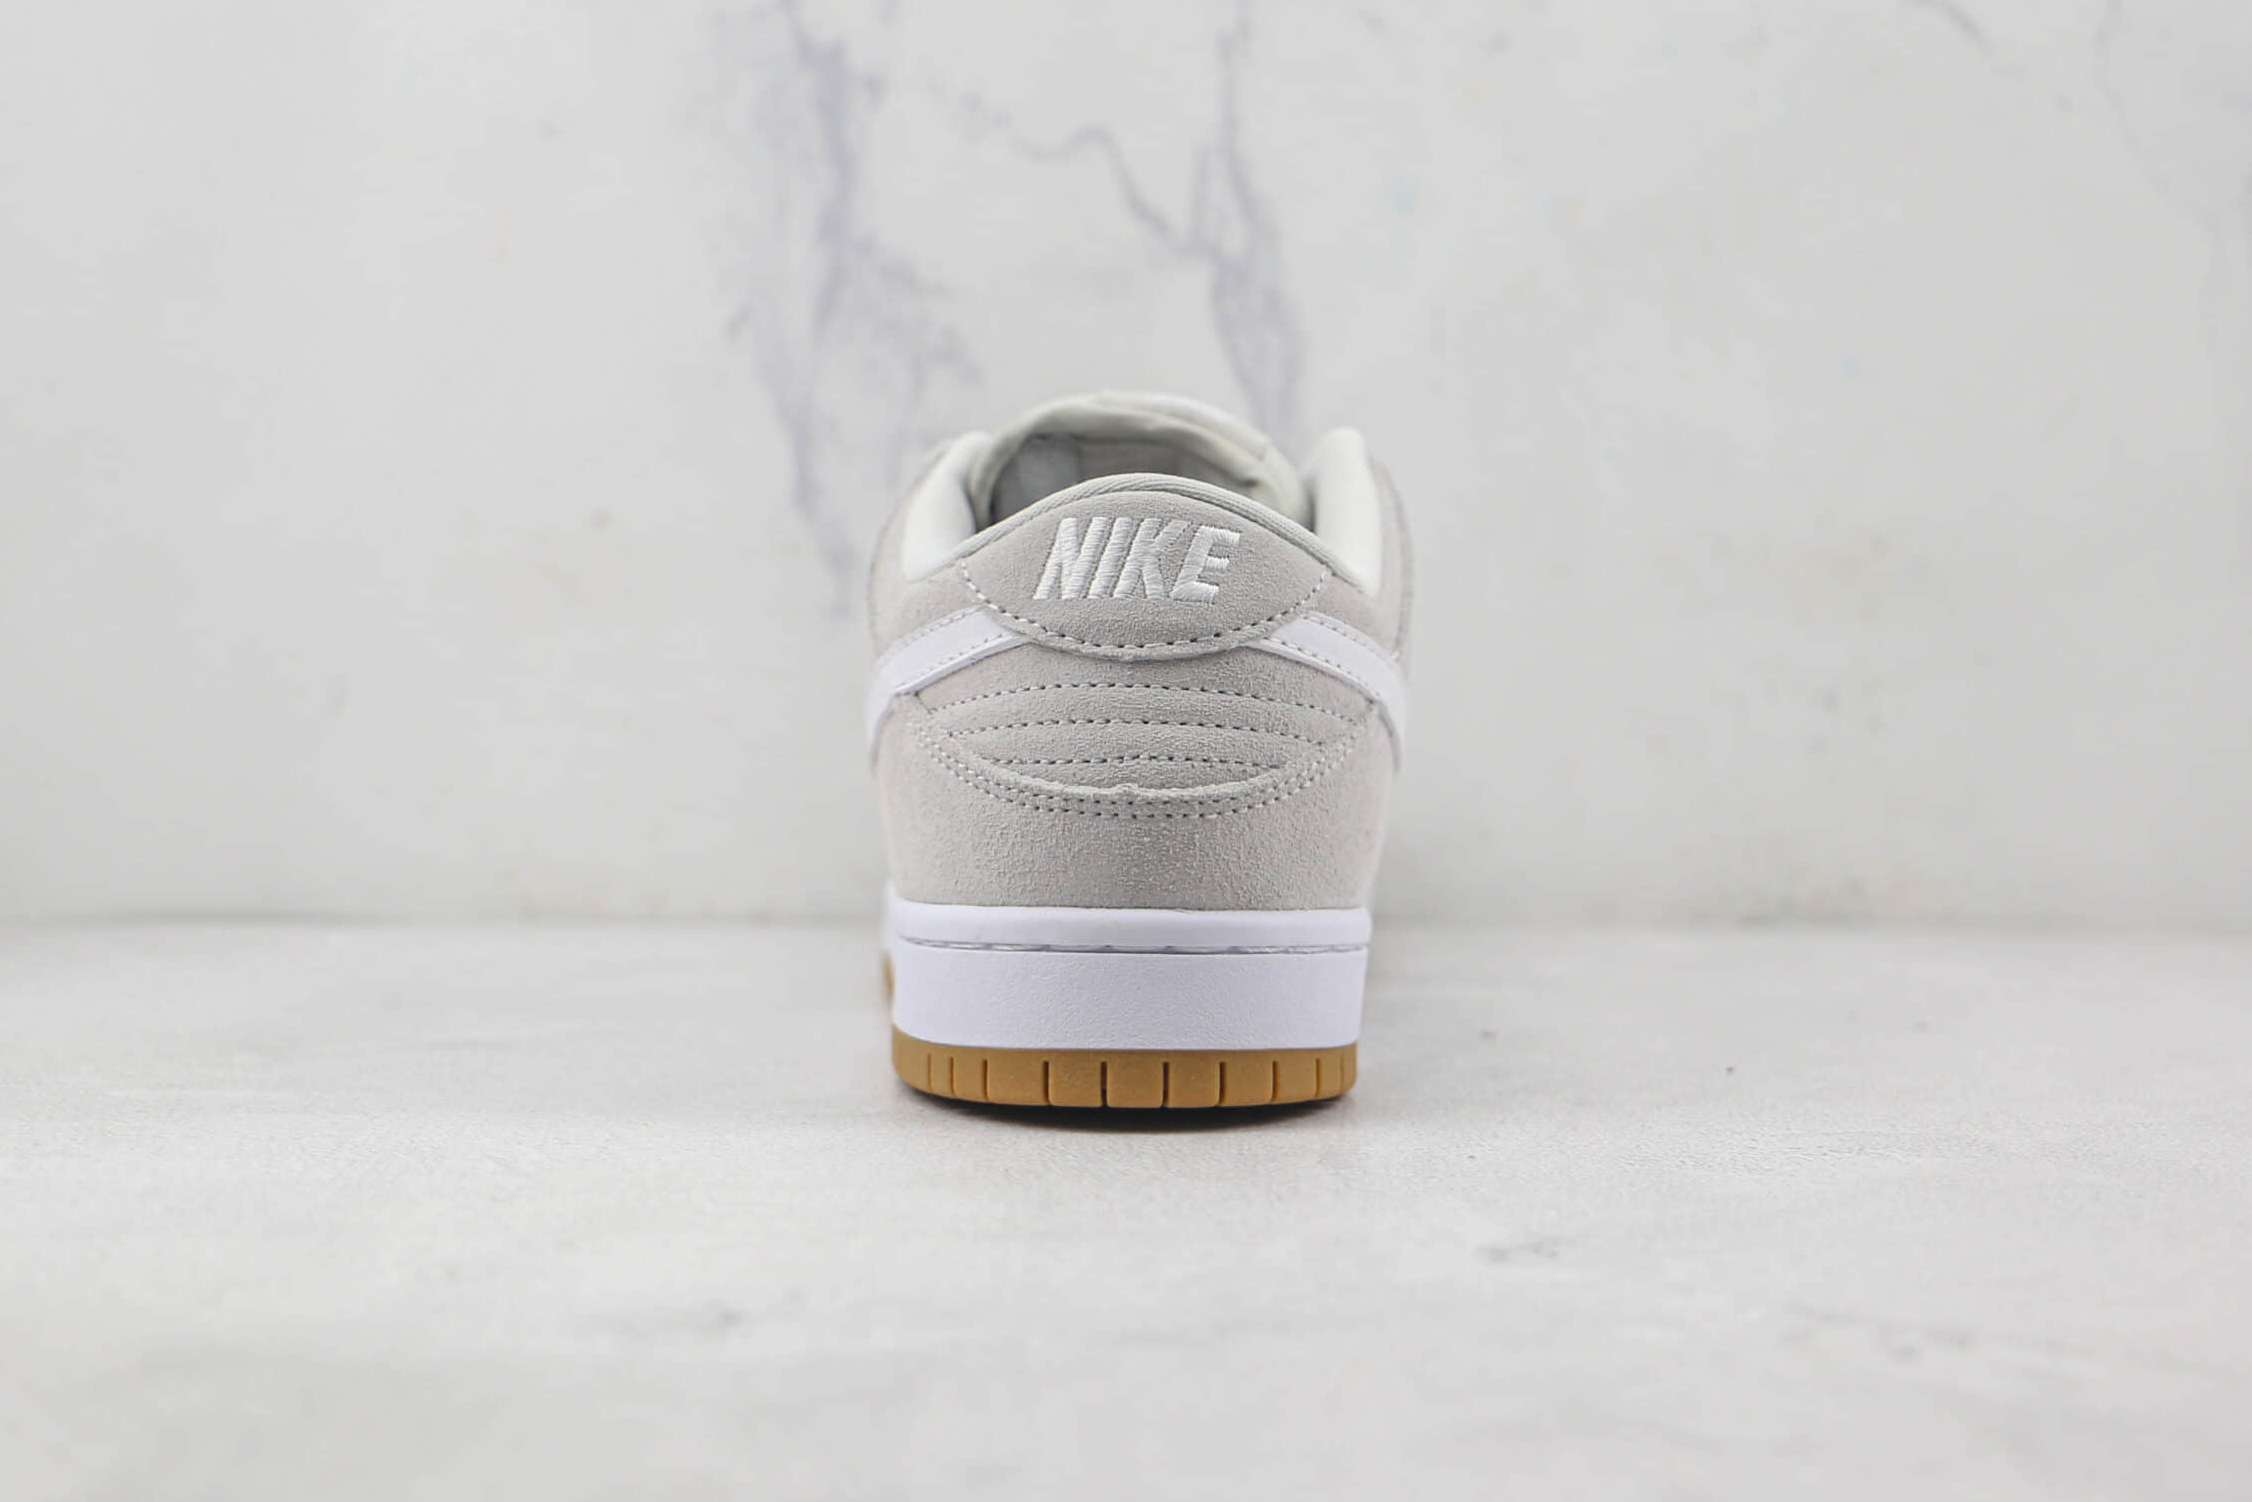 Nike SB Dunk Low Grey White Brown 304292-106 - Stylish and Comfortable Skate Shoes